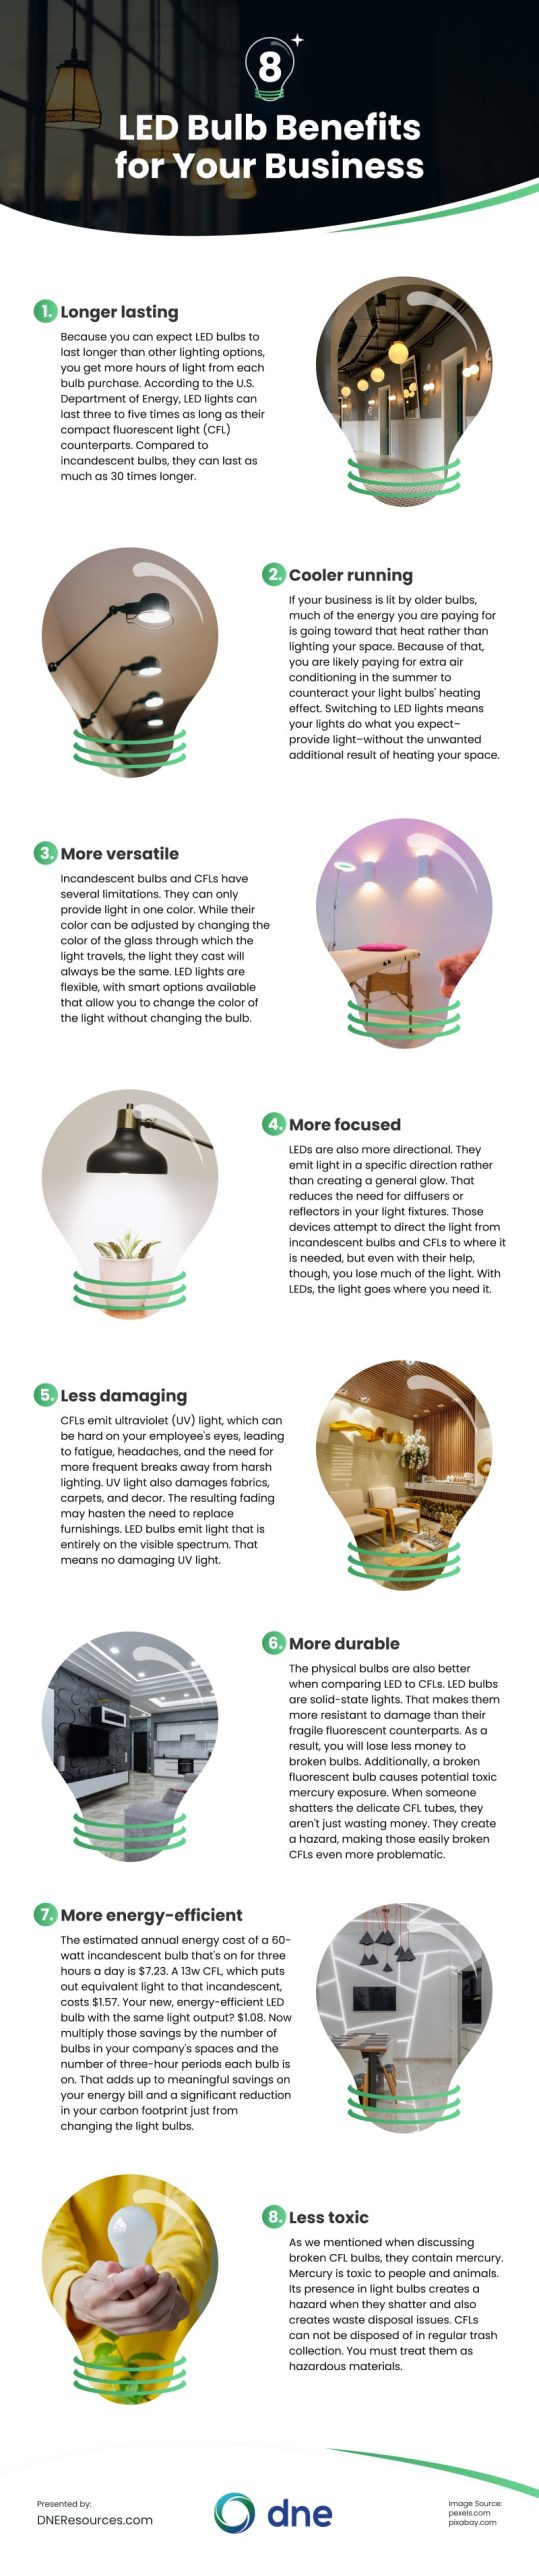 8 LED Bulb Benefits for Your Business Infographic